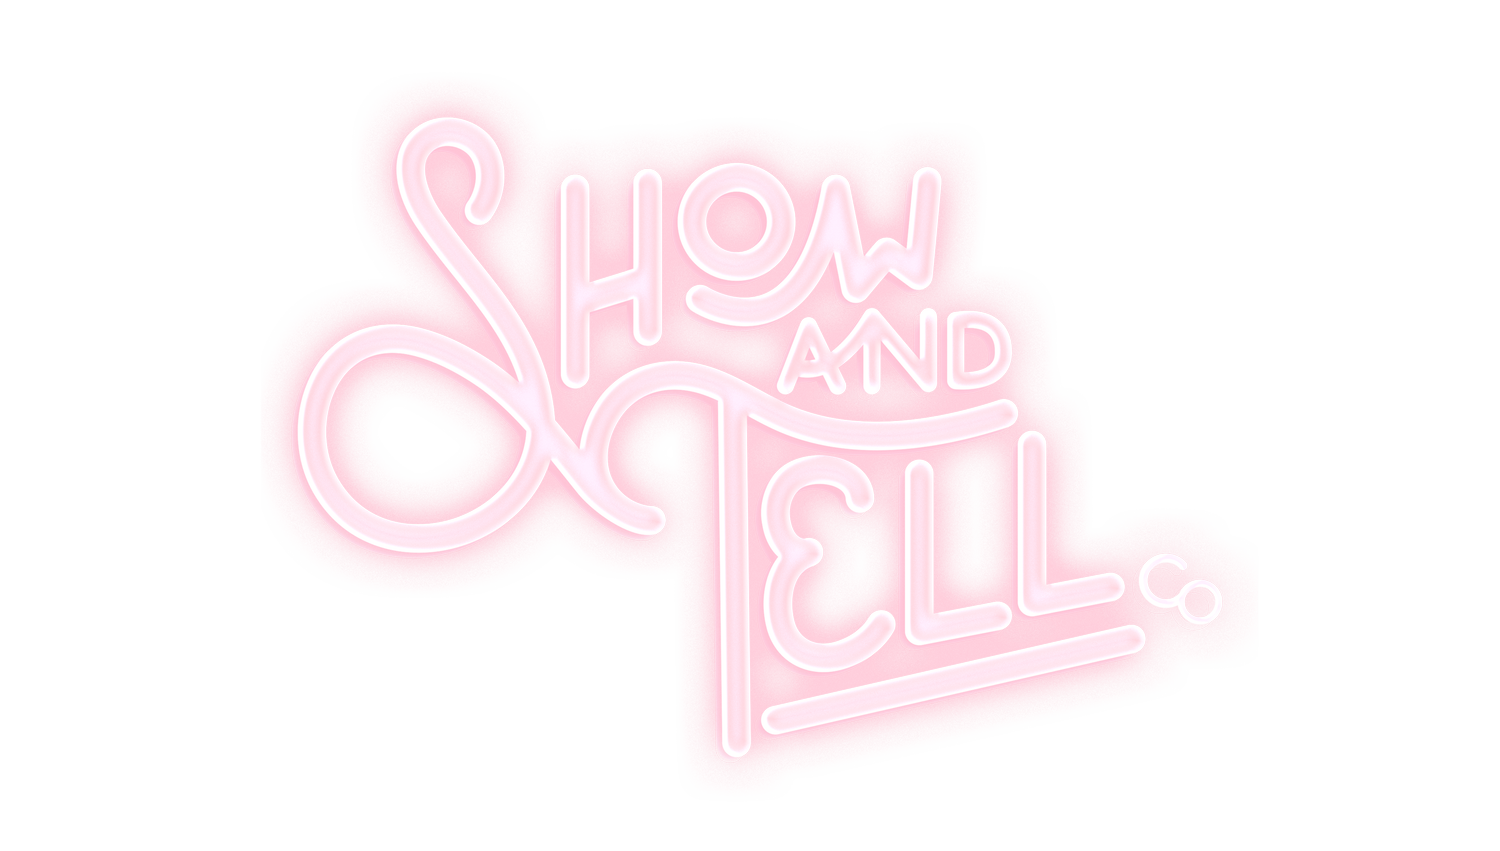 Show and Tell co.